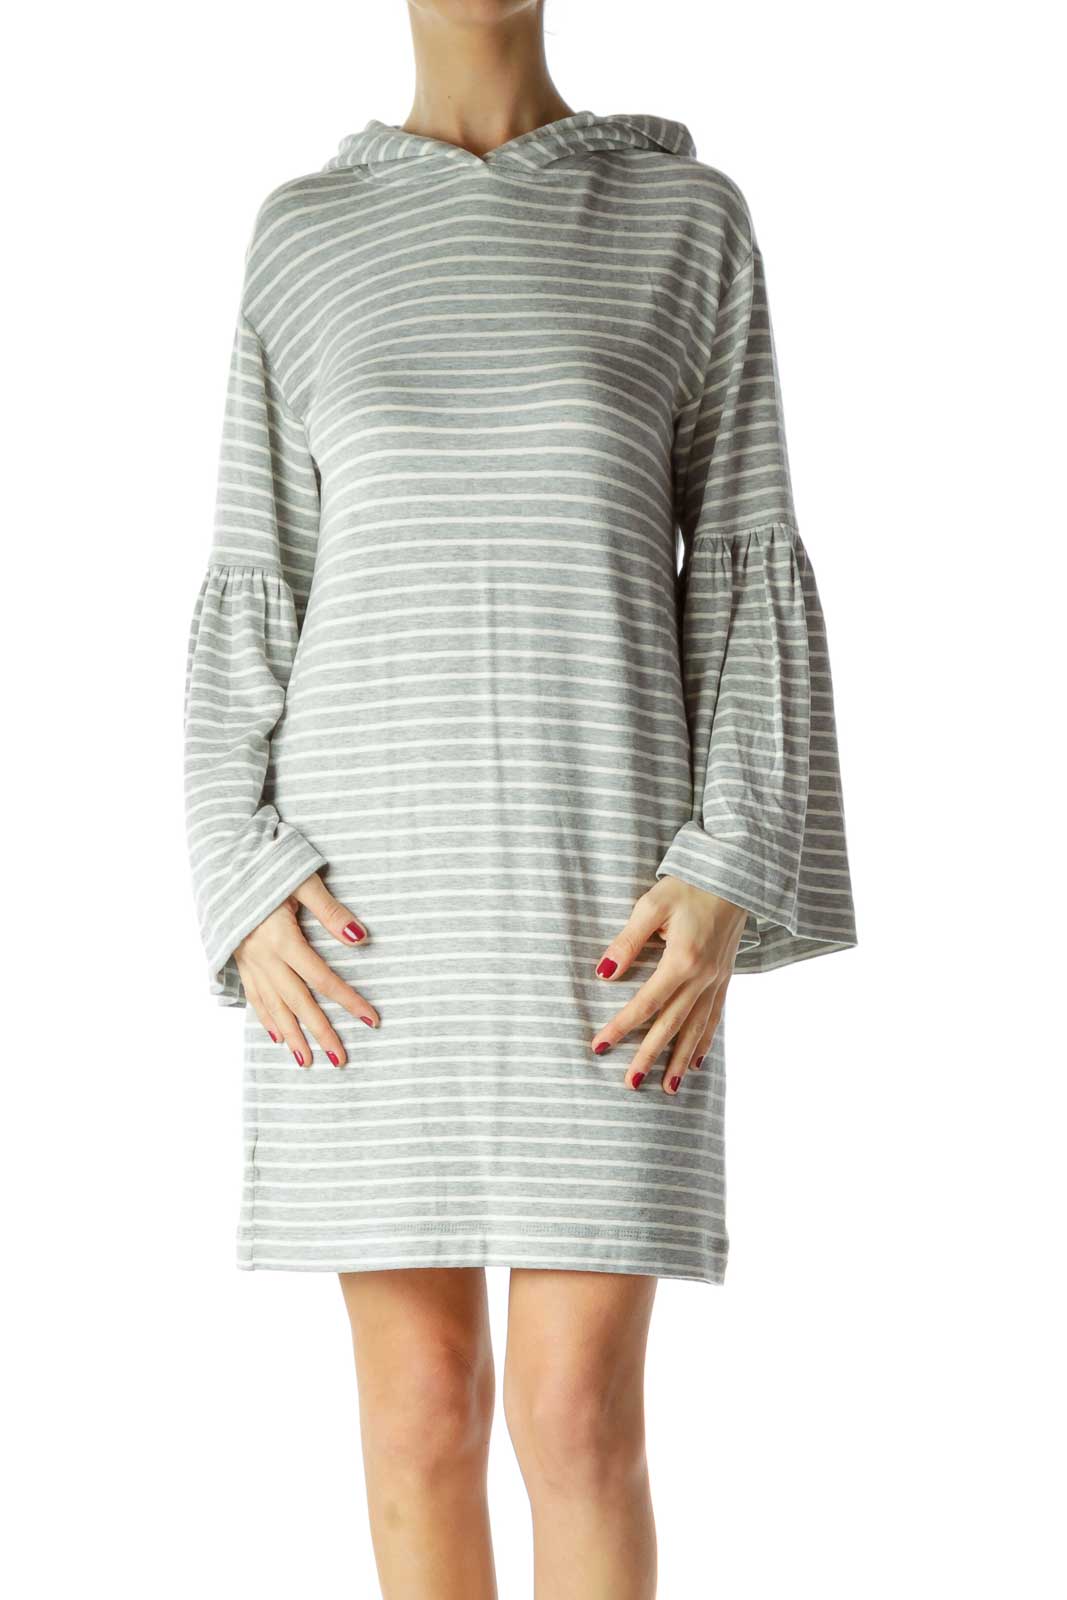 Gray White Striped Jersey-Knit Dress with Hood Front